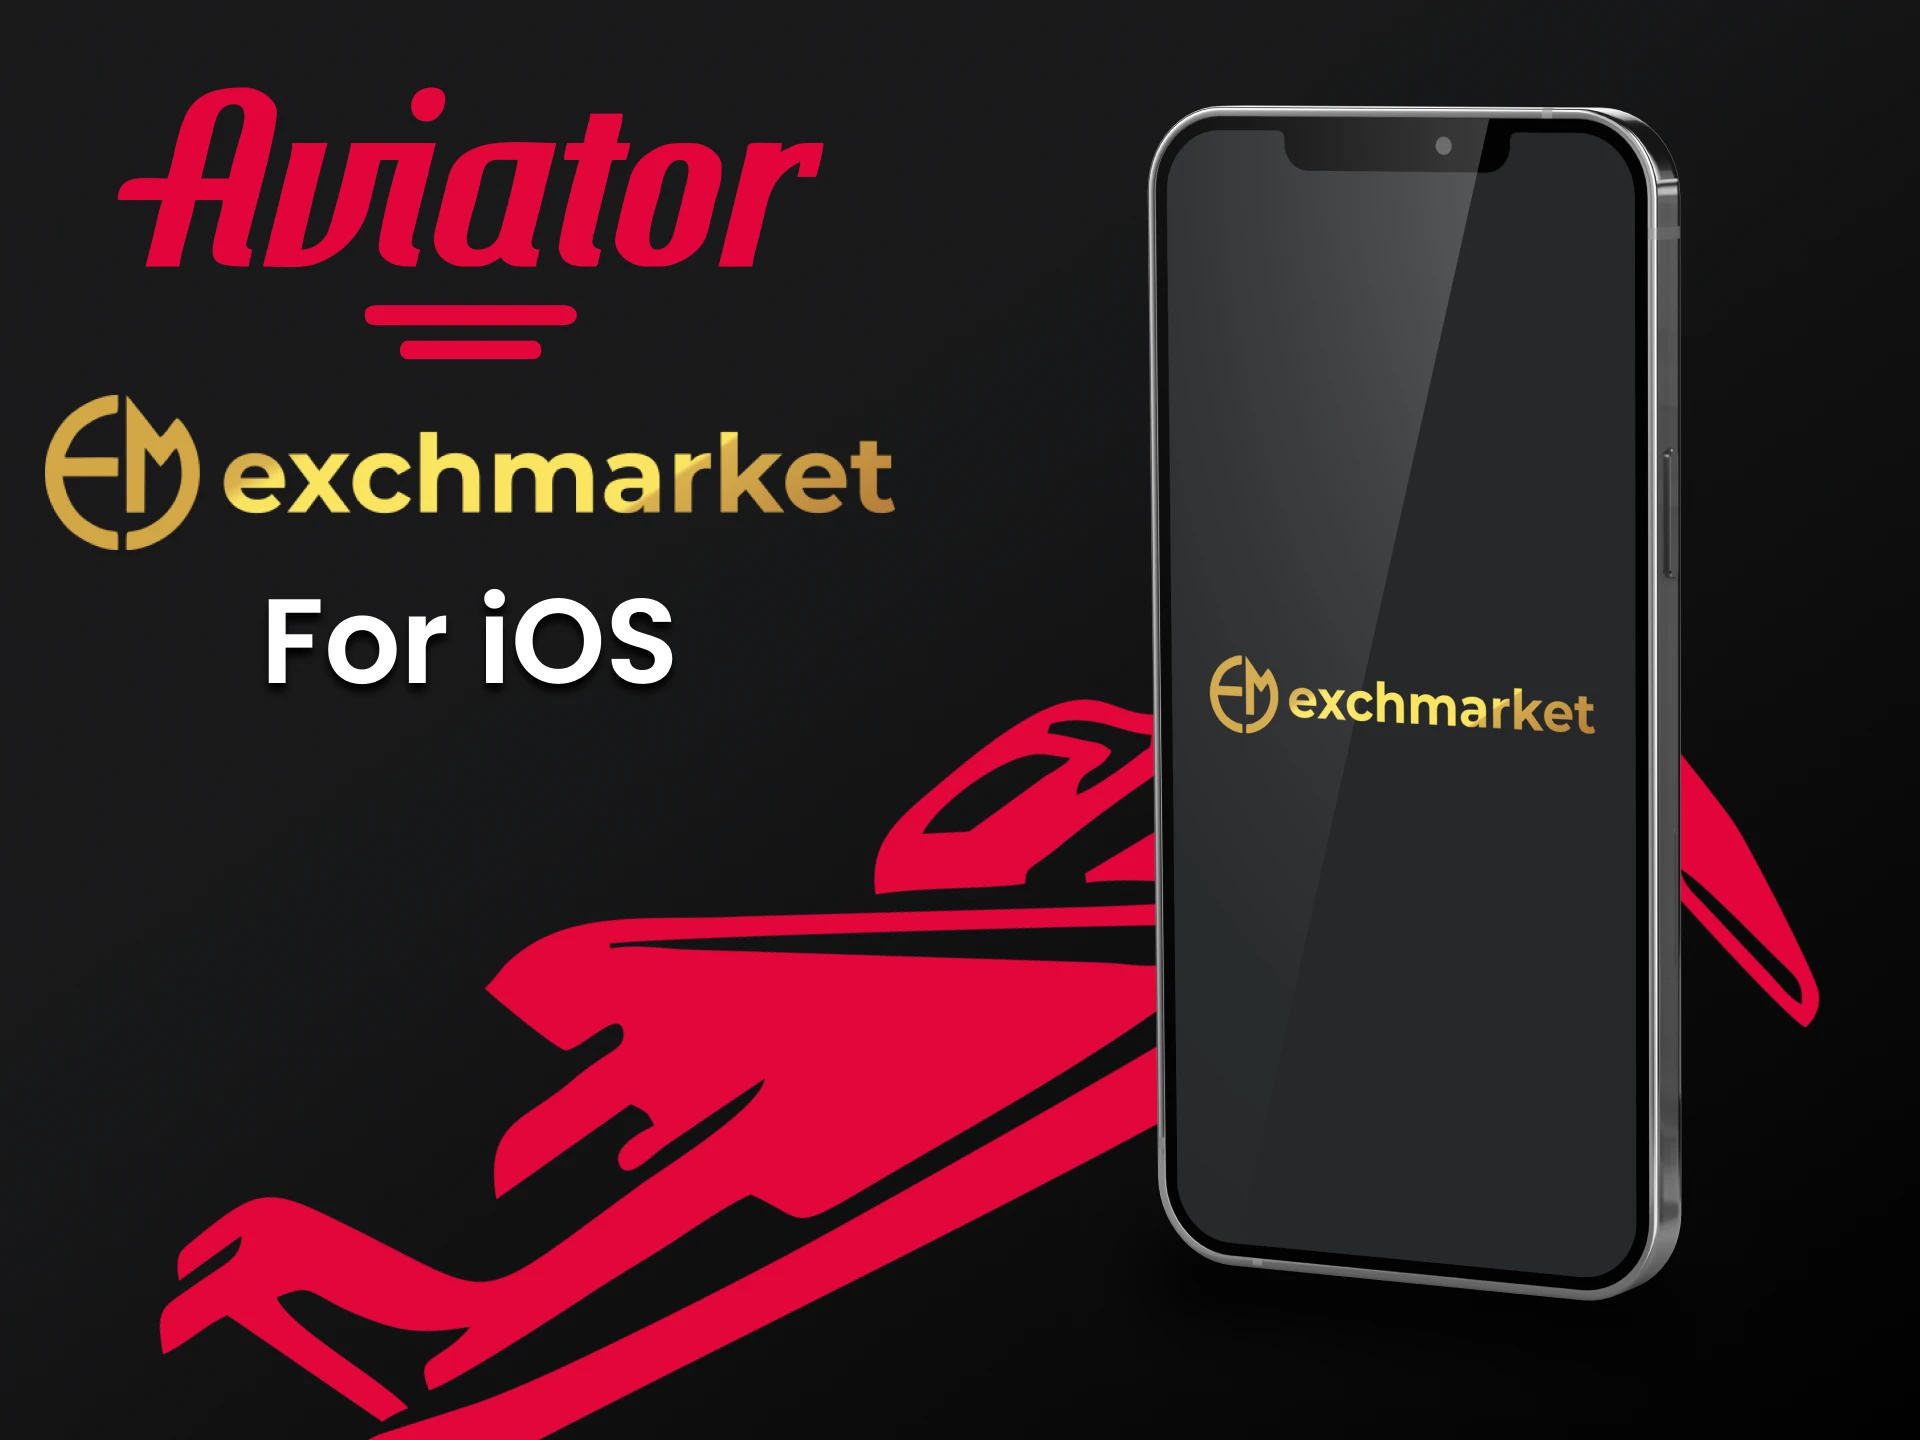 Install the Exchmarket iOS device app to play Aviator.